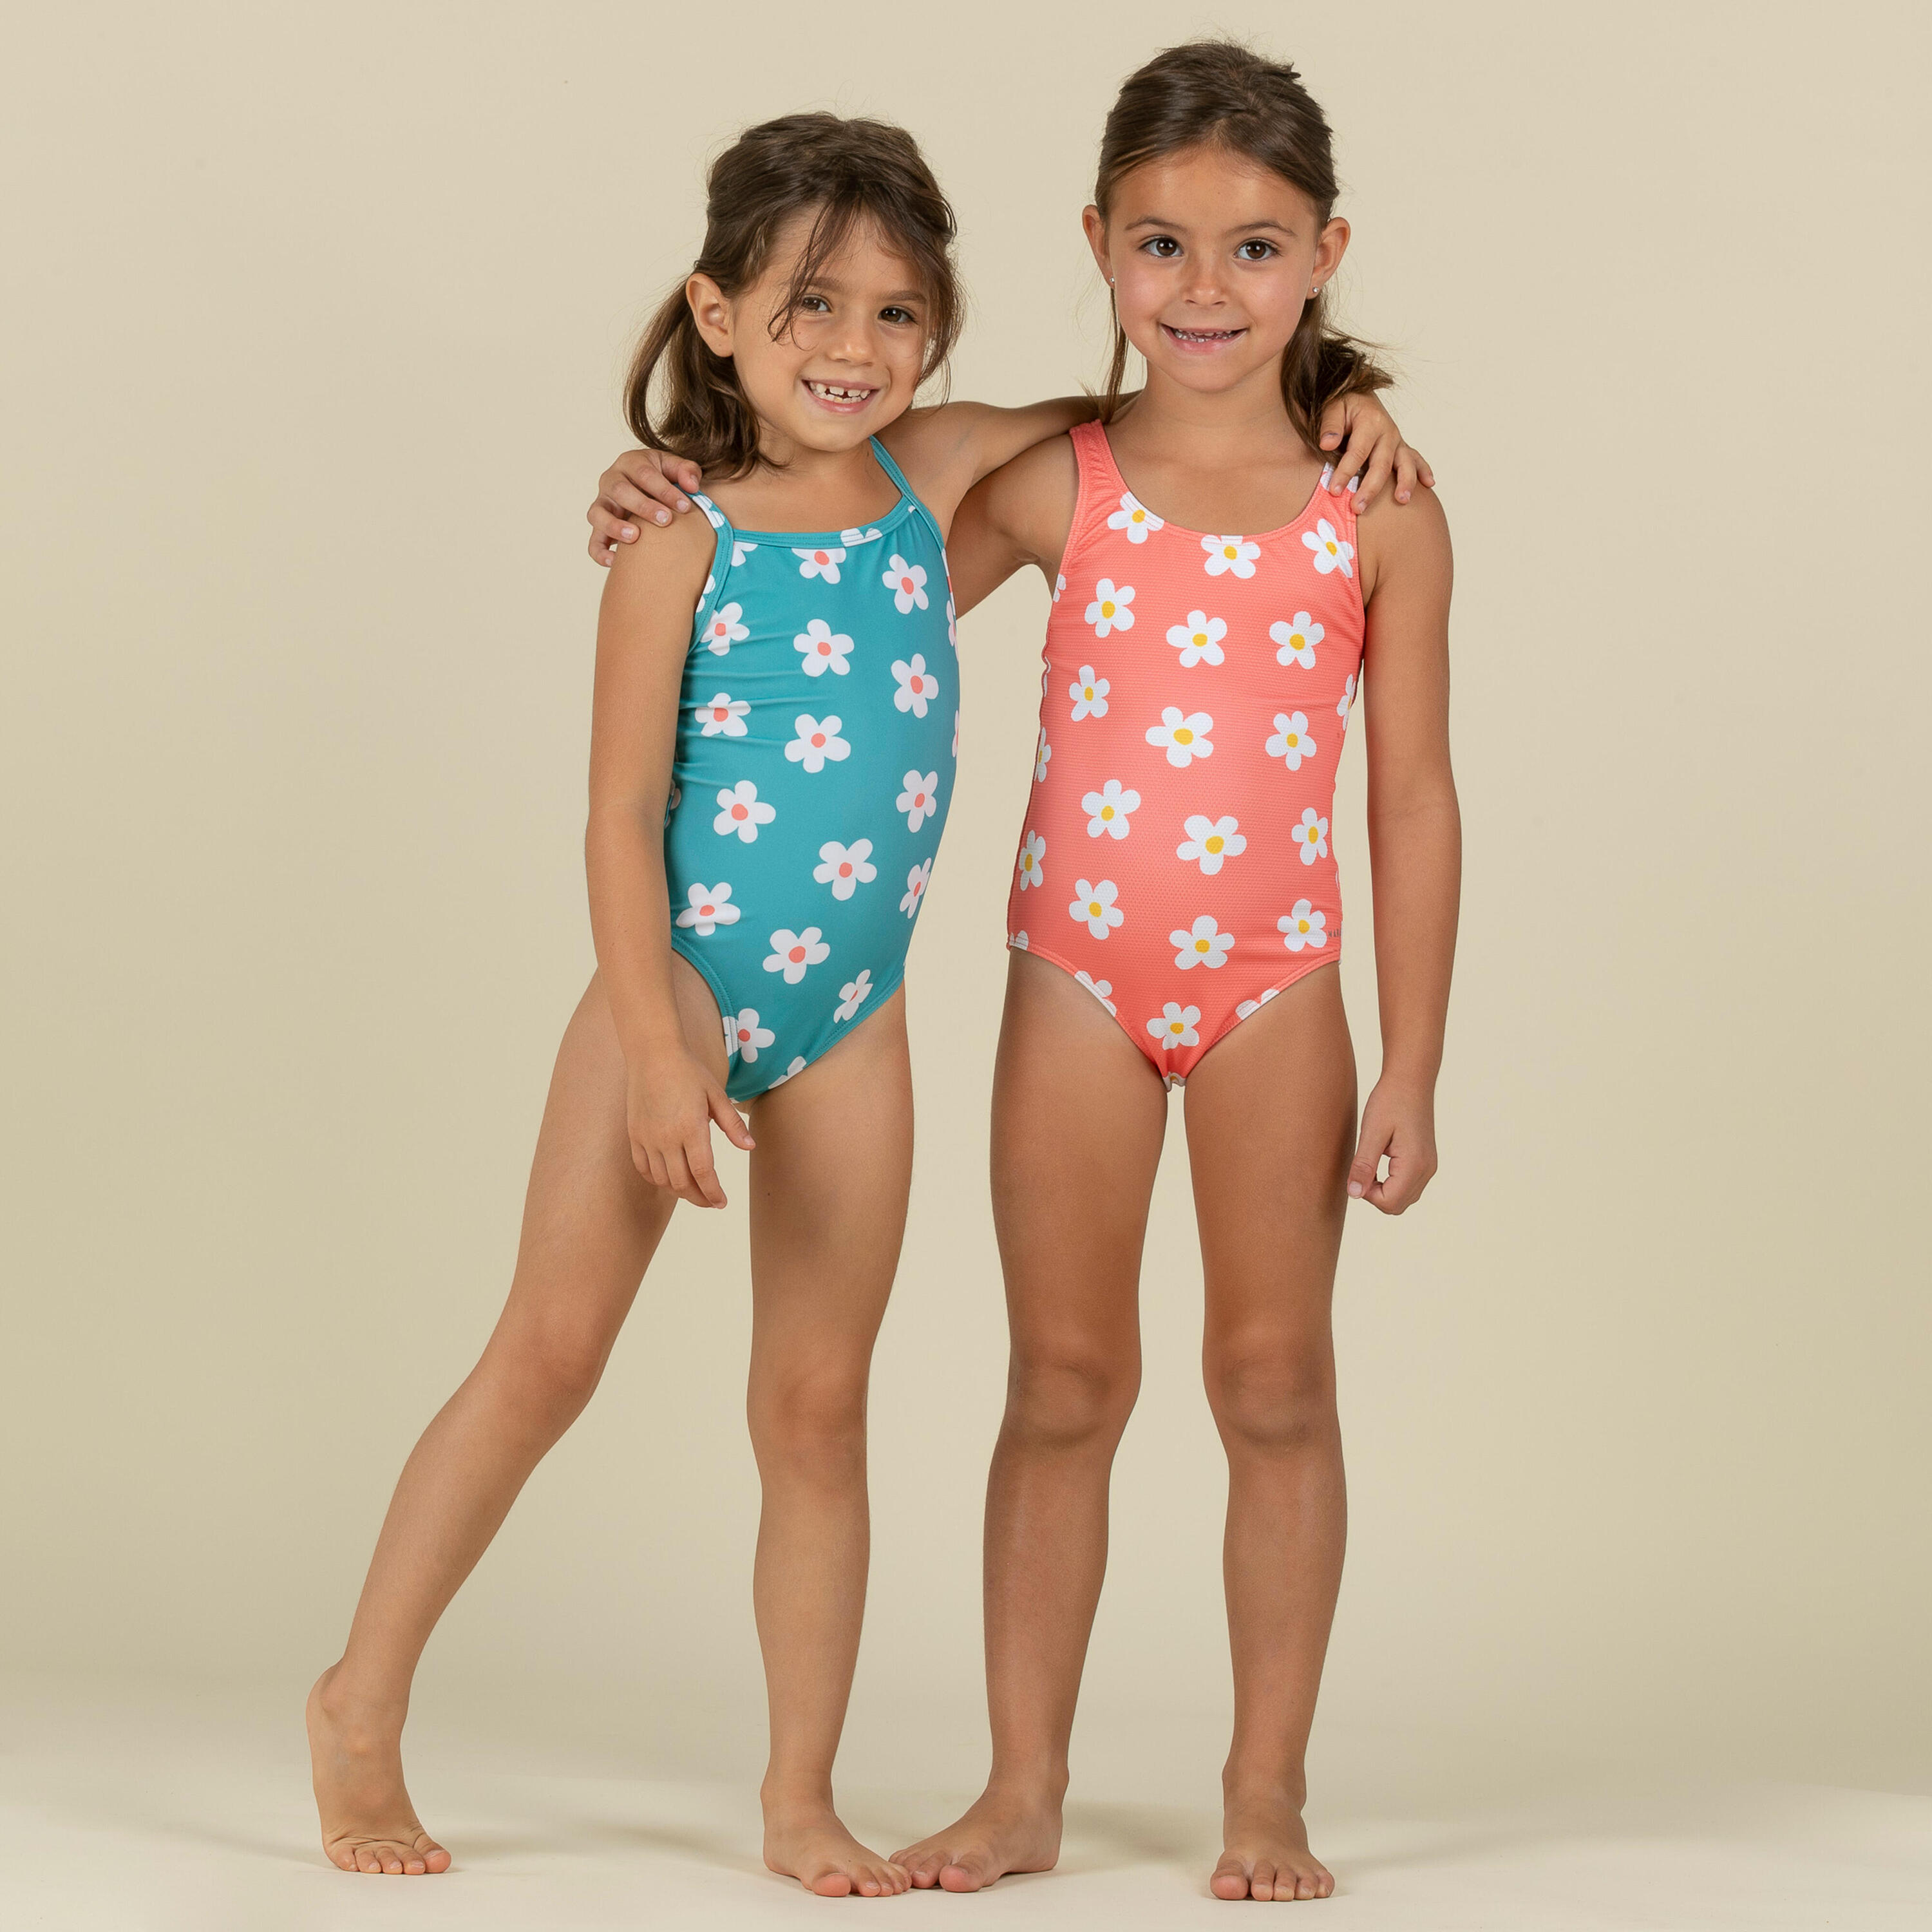 Baby Girls' One-Piece Swimsuit Blue with Flower Print 3/11